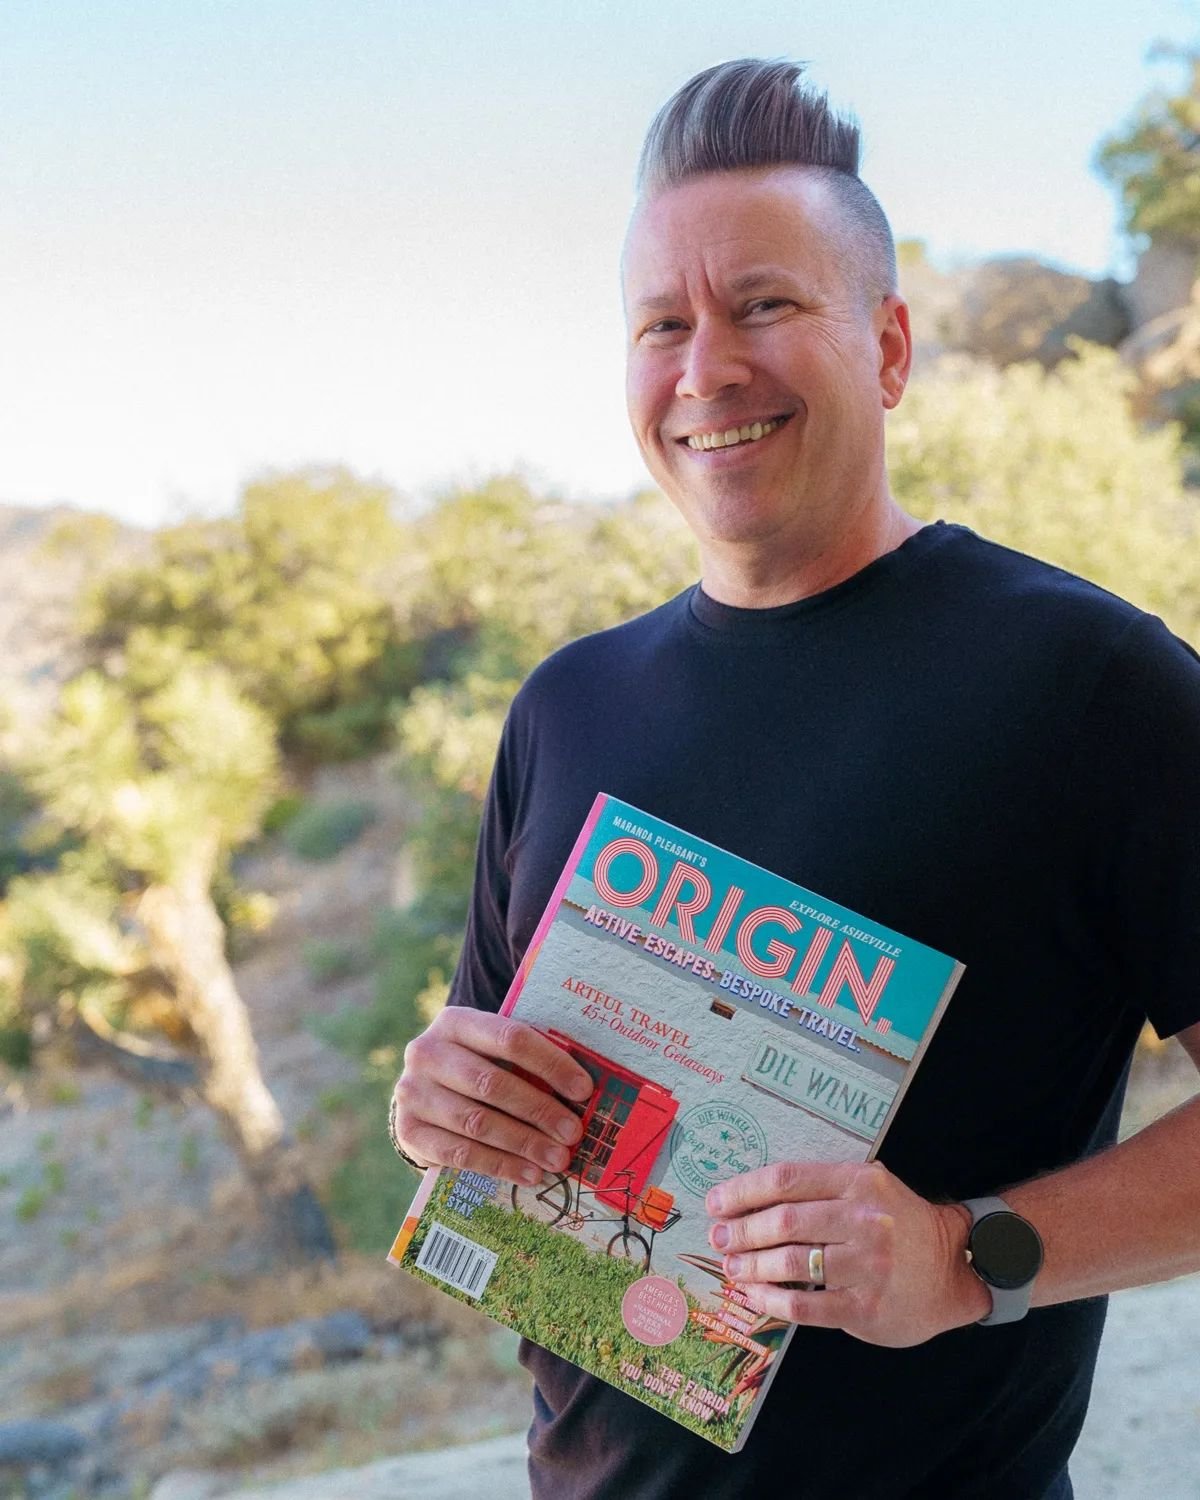 Calling all desert lovers! ☀️ I am thrilled to have TWO photo interviews in the latest issue of @originmagazine (#OriginMagazine Issue 56)!

I take you on a sun-soaked adventure through the magical landscapes of Joshua Tree and Palm Springs: &quot;Ro